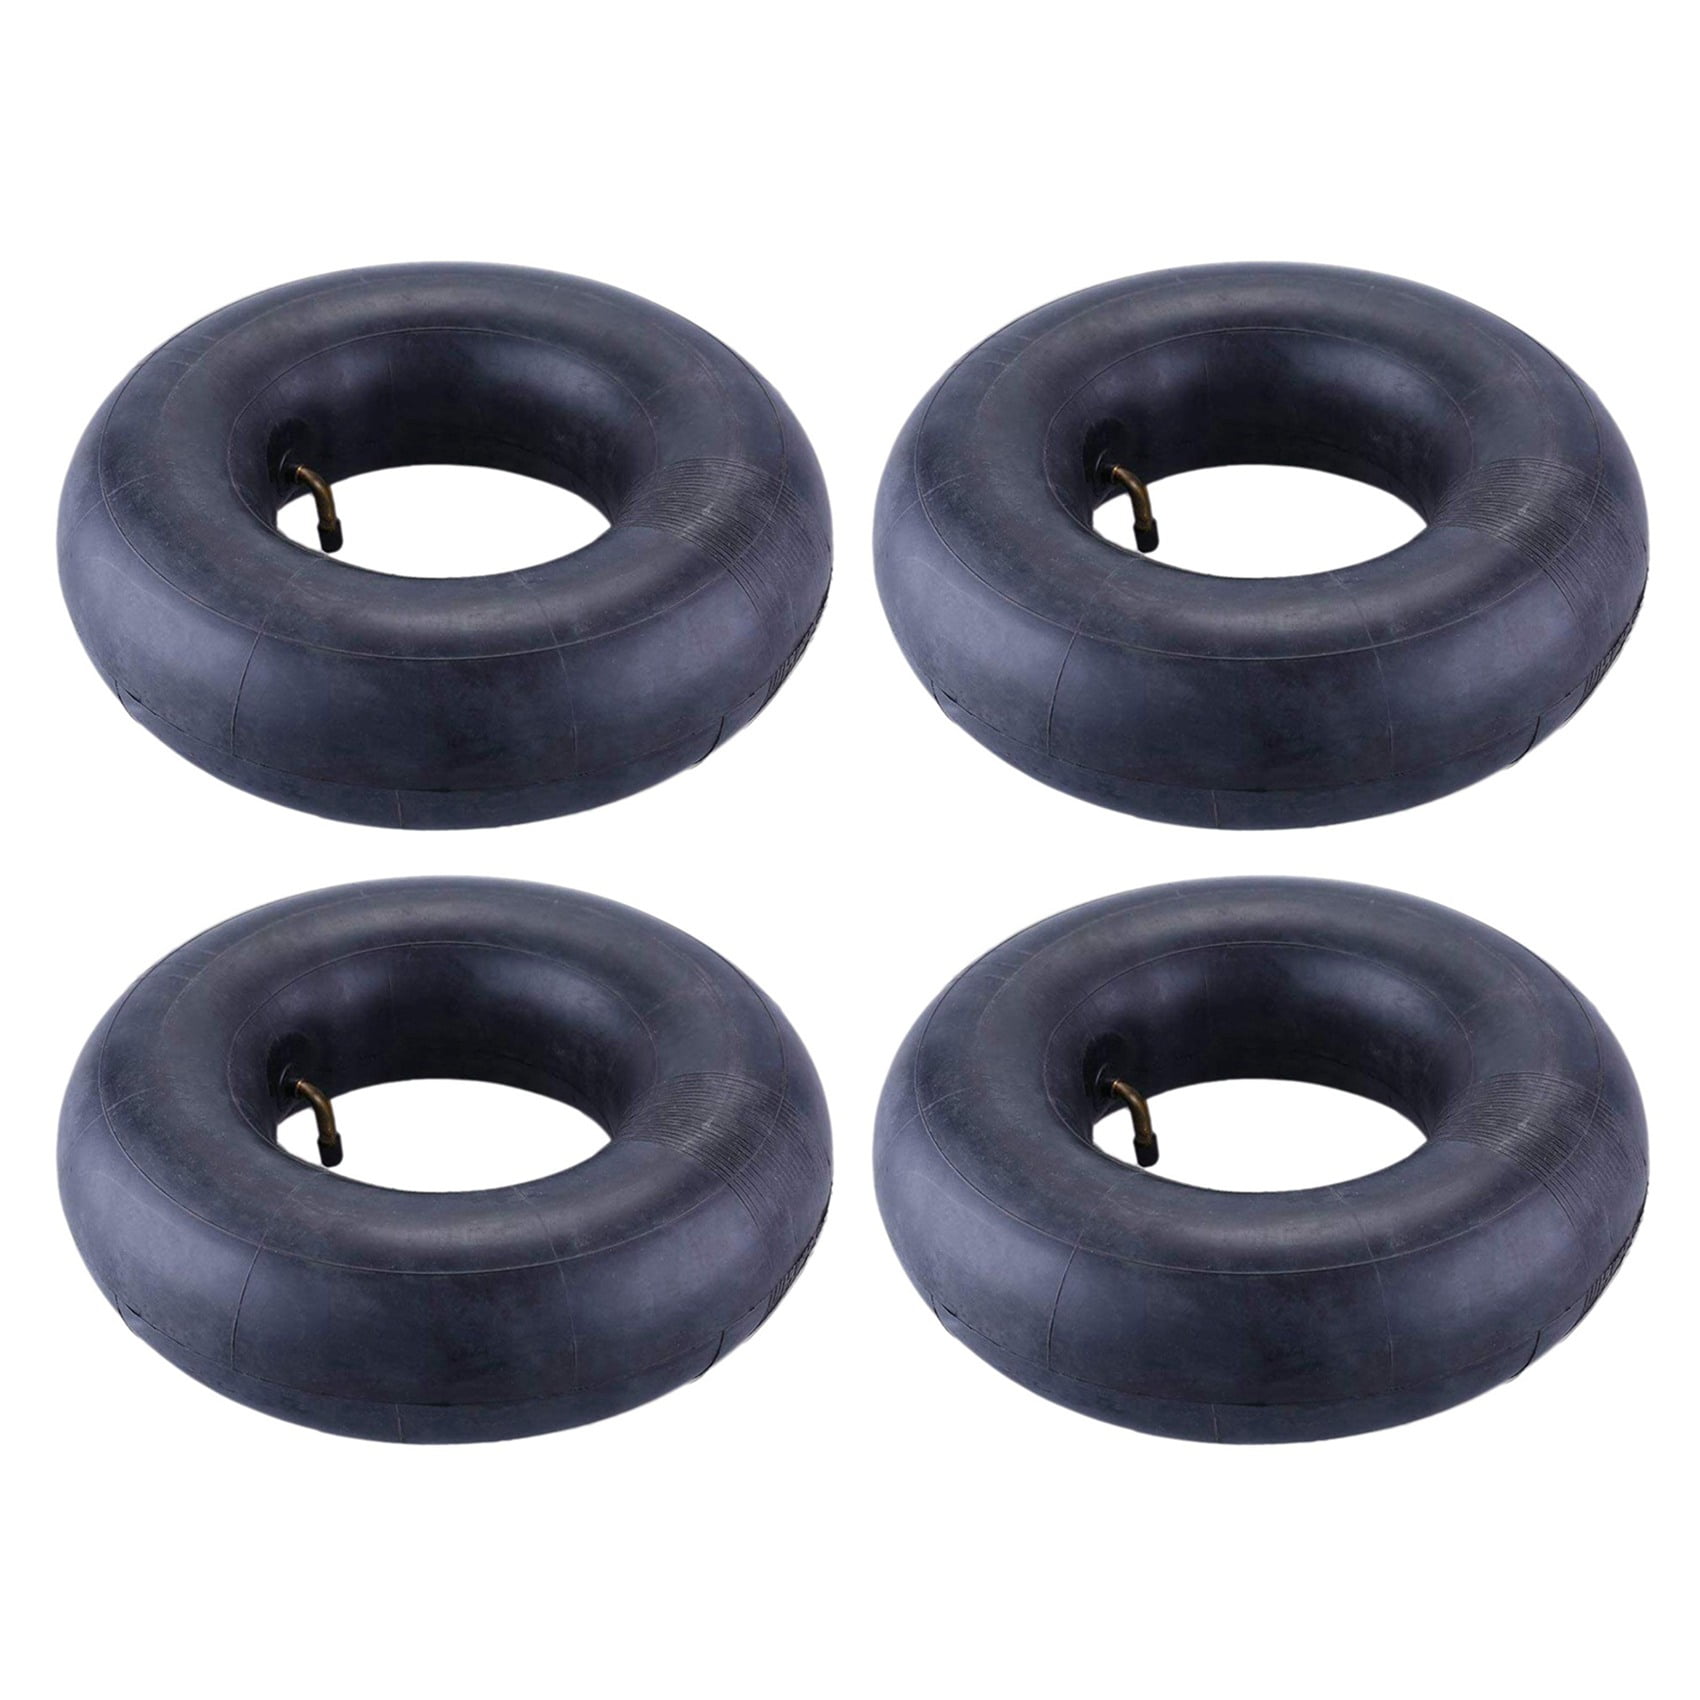 13X5.00-6 Replacement Inner Tube for Garden Carts Lawn Mowers and More 